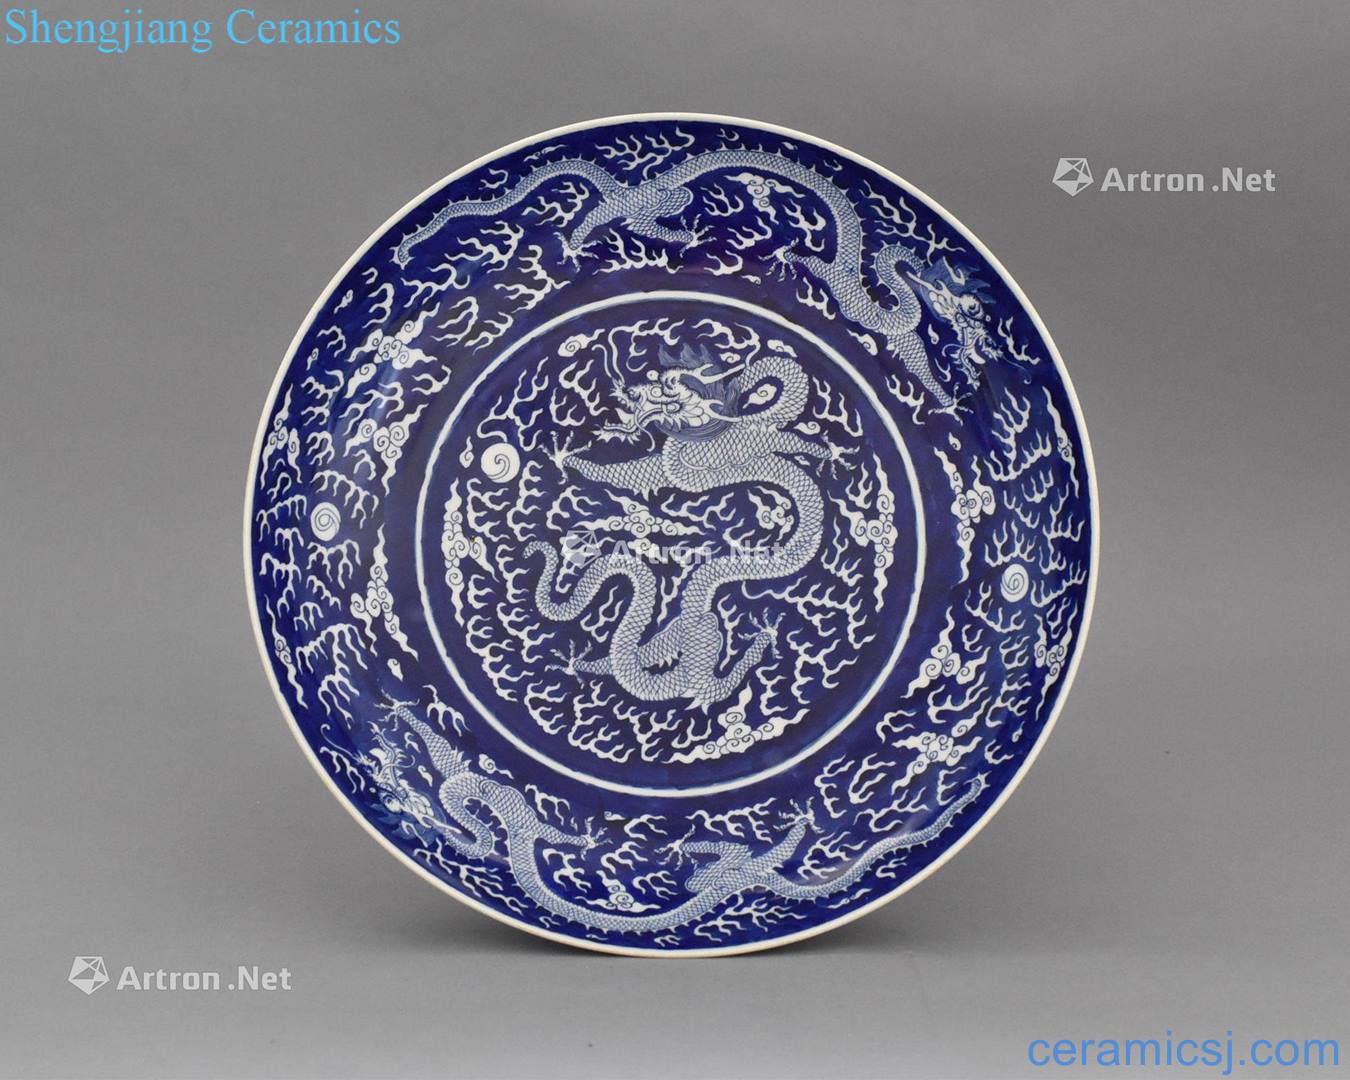 The Qing Dynasty DAOGUANG MARK DAOGUANG REVERSED BLUE GLAZED DRAGON CHARGER